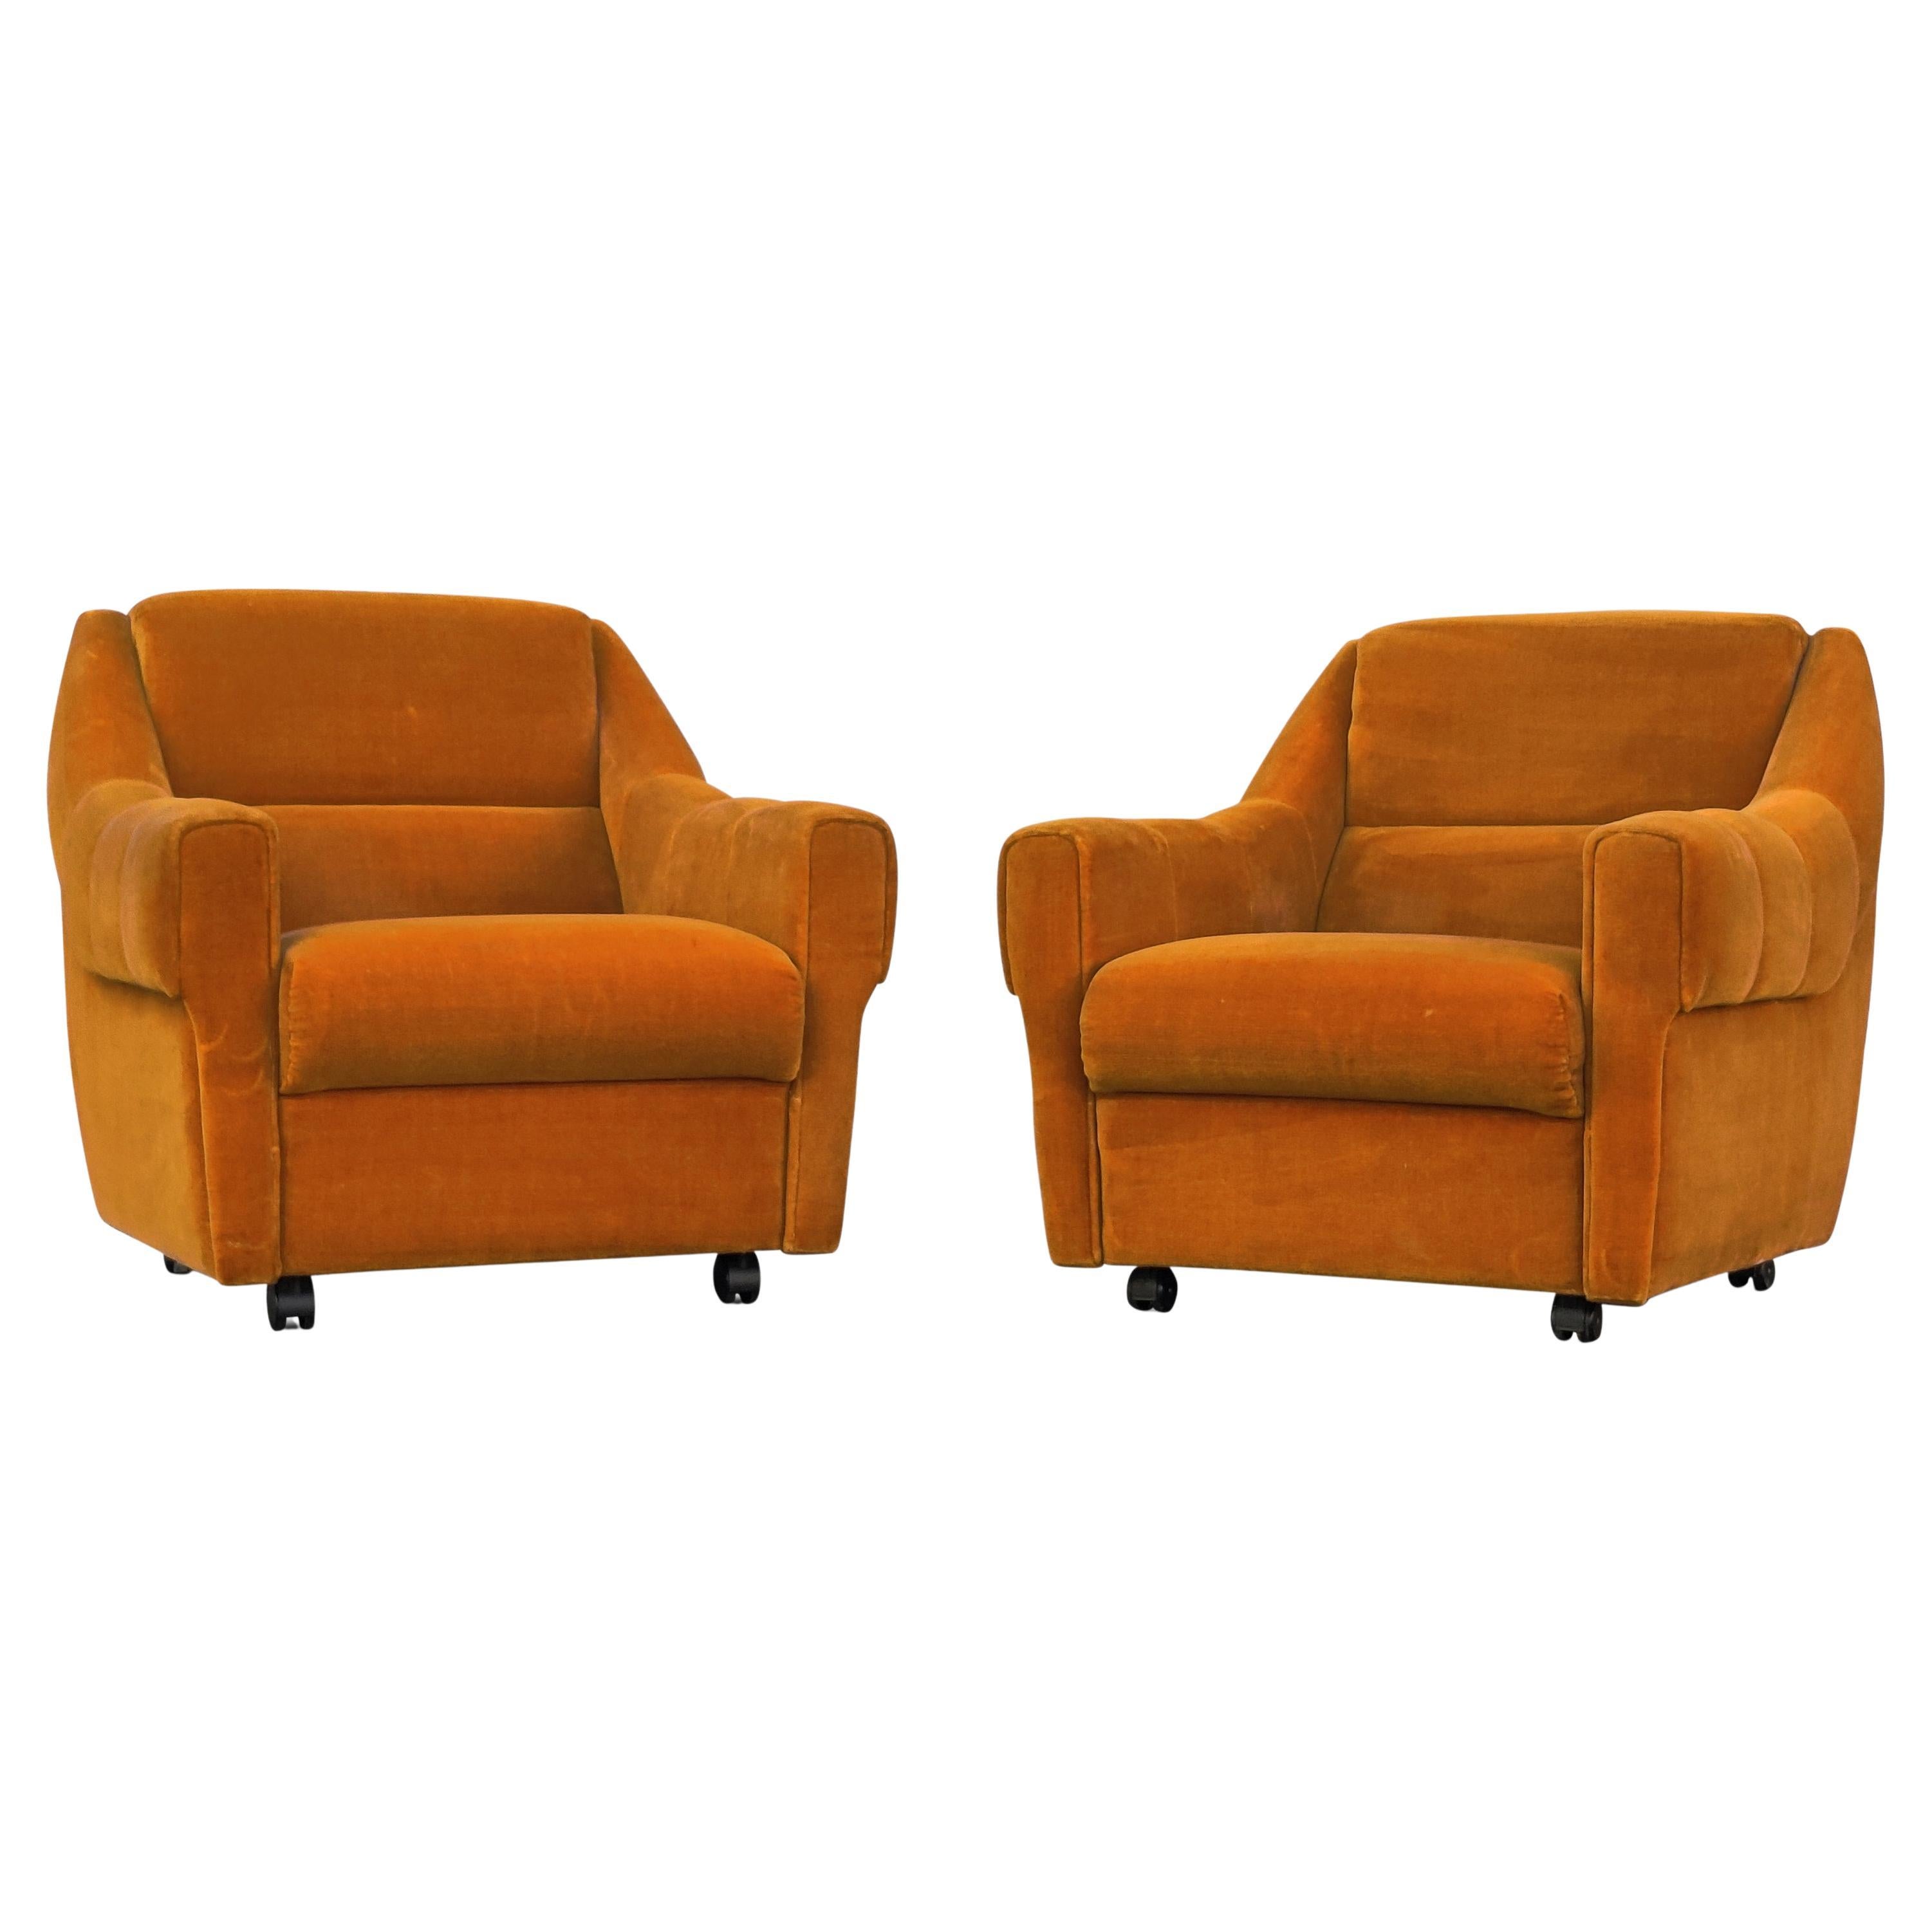 A low slung pair of orange upholstered lounge or club chairs, made in Denmark over 50 years ago, and have aged like fine wine! The construction is very strong and makes for a great seating experience. The cushions are soft and supple and mold to